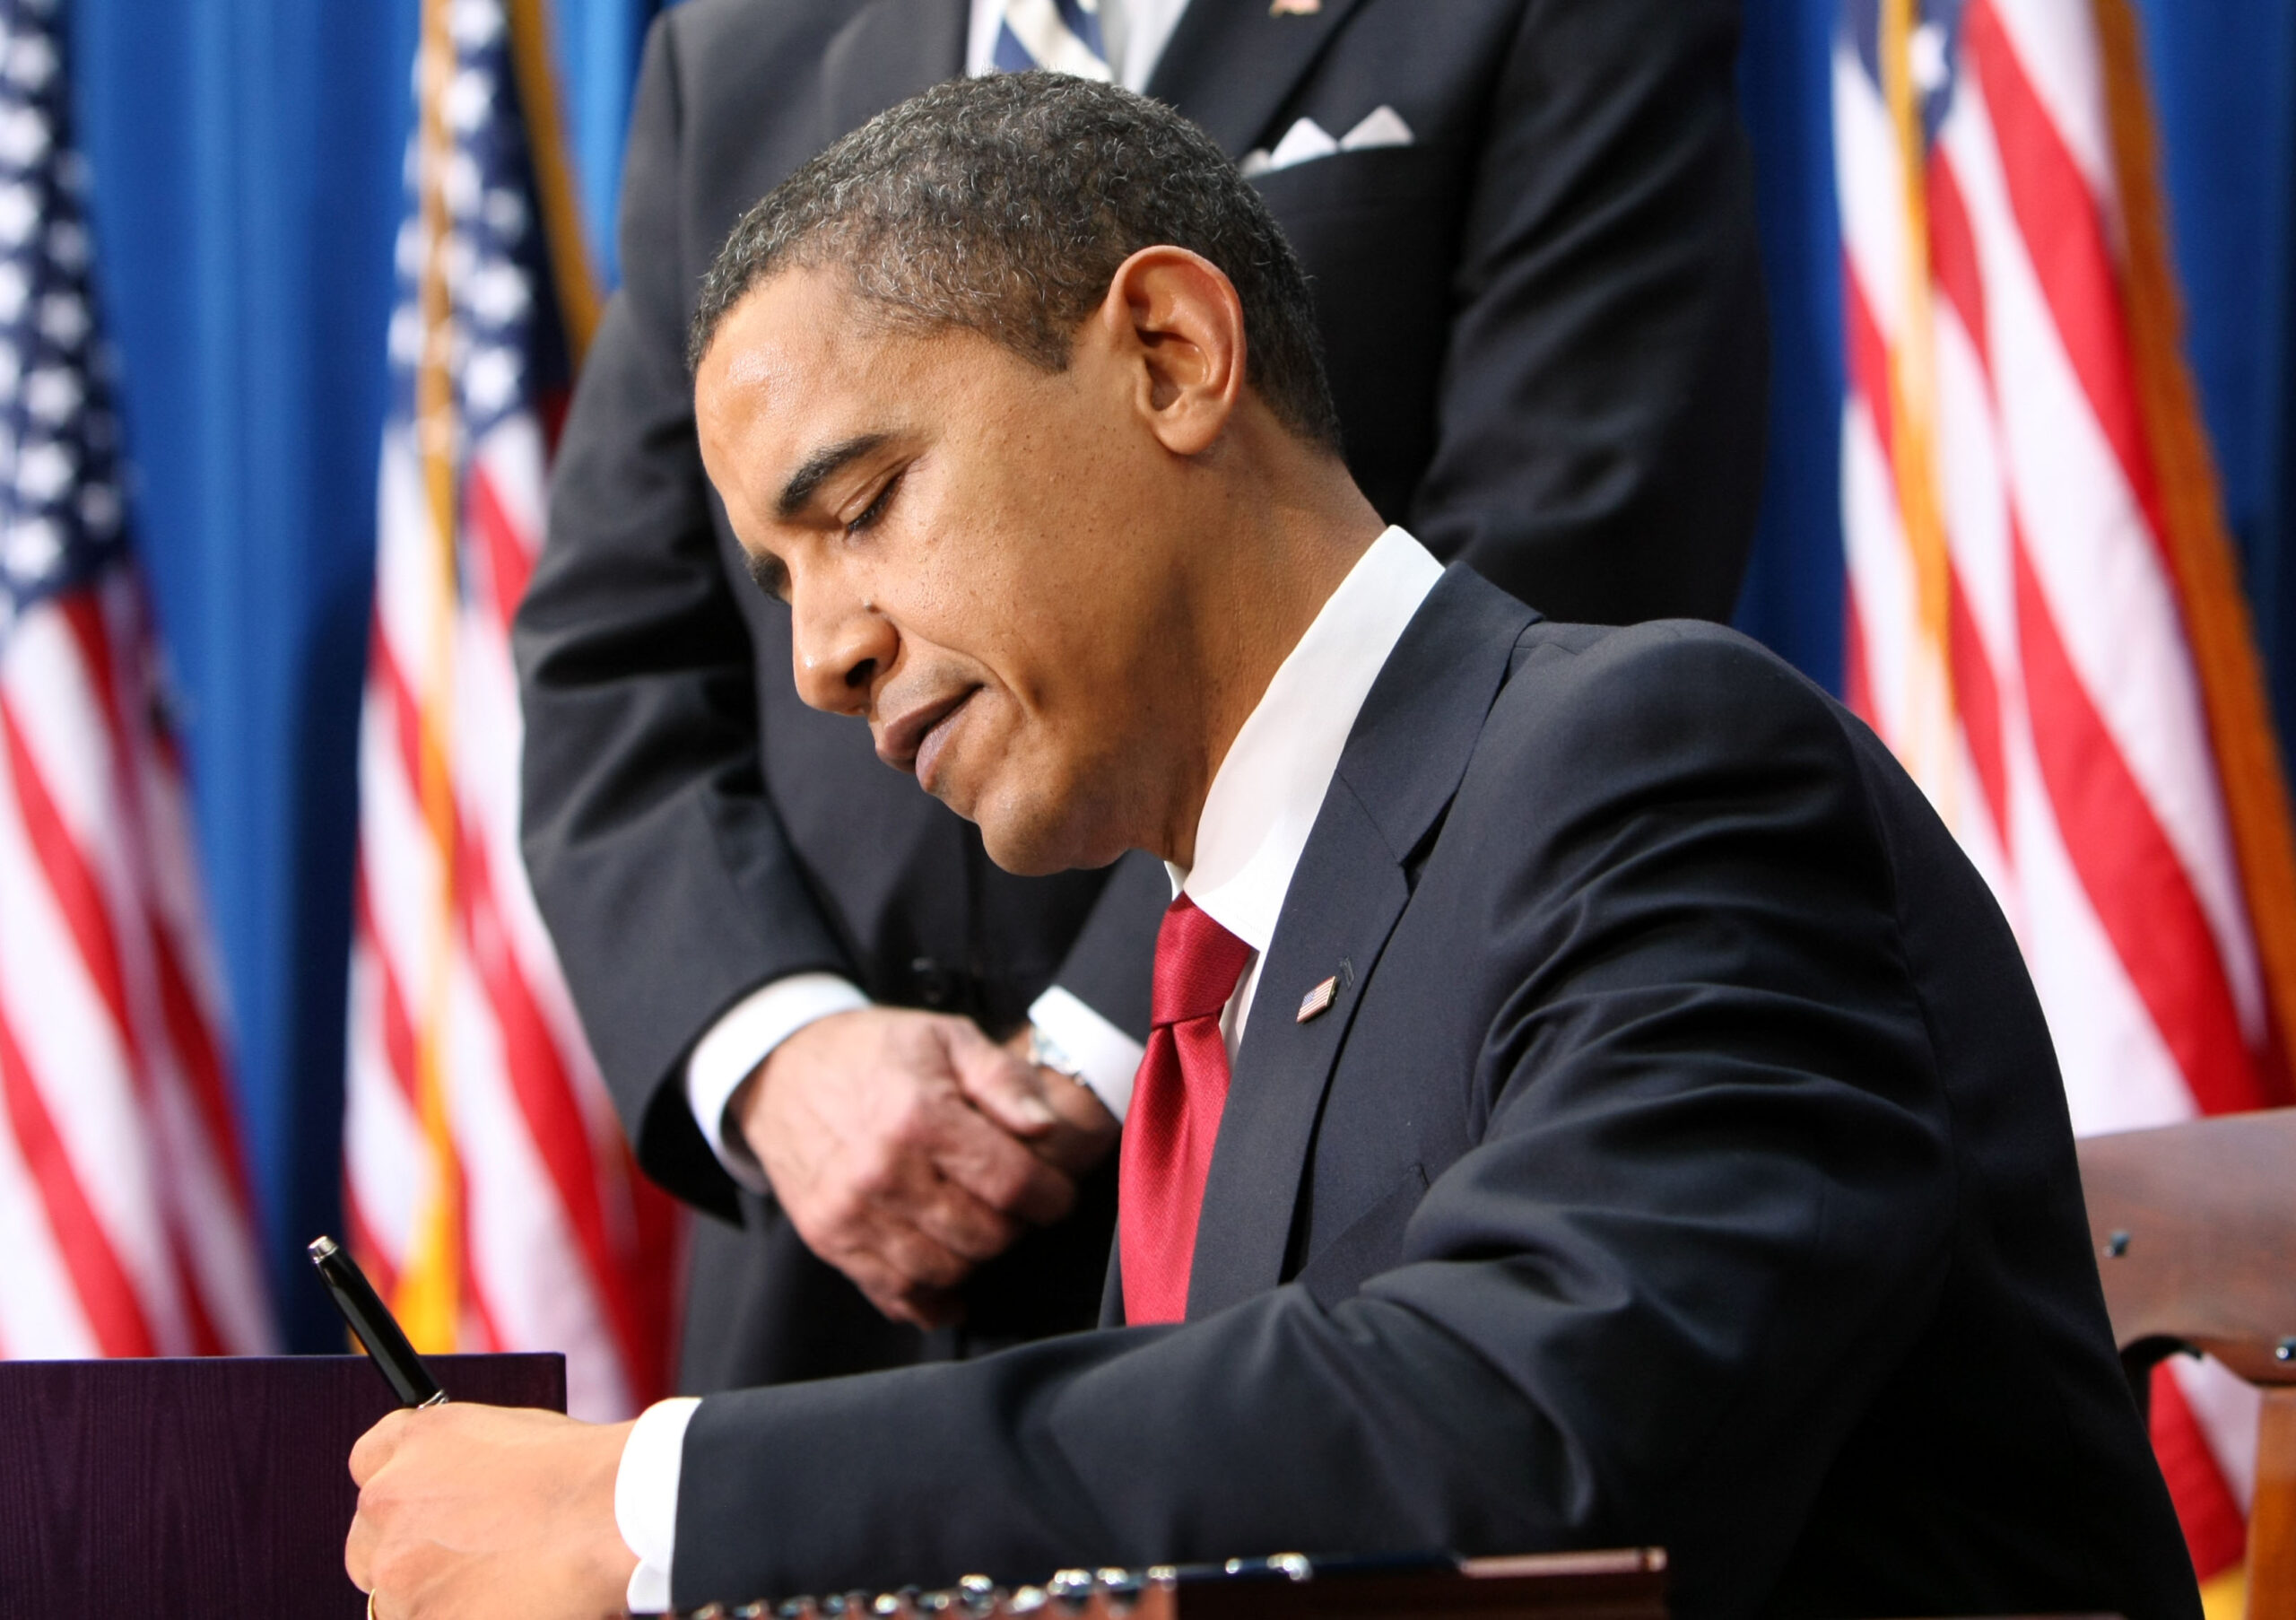 President Barack Obama signs the American Recovery and Reinvestment Act